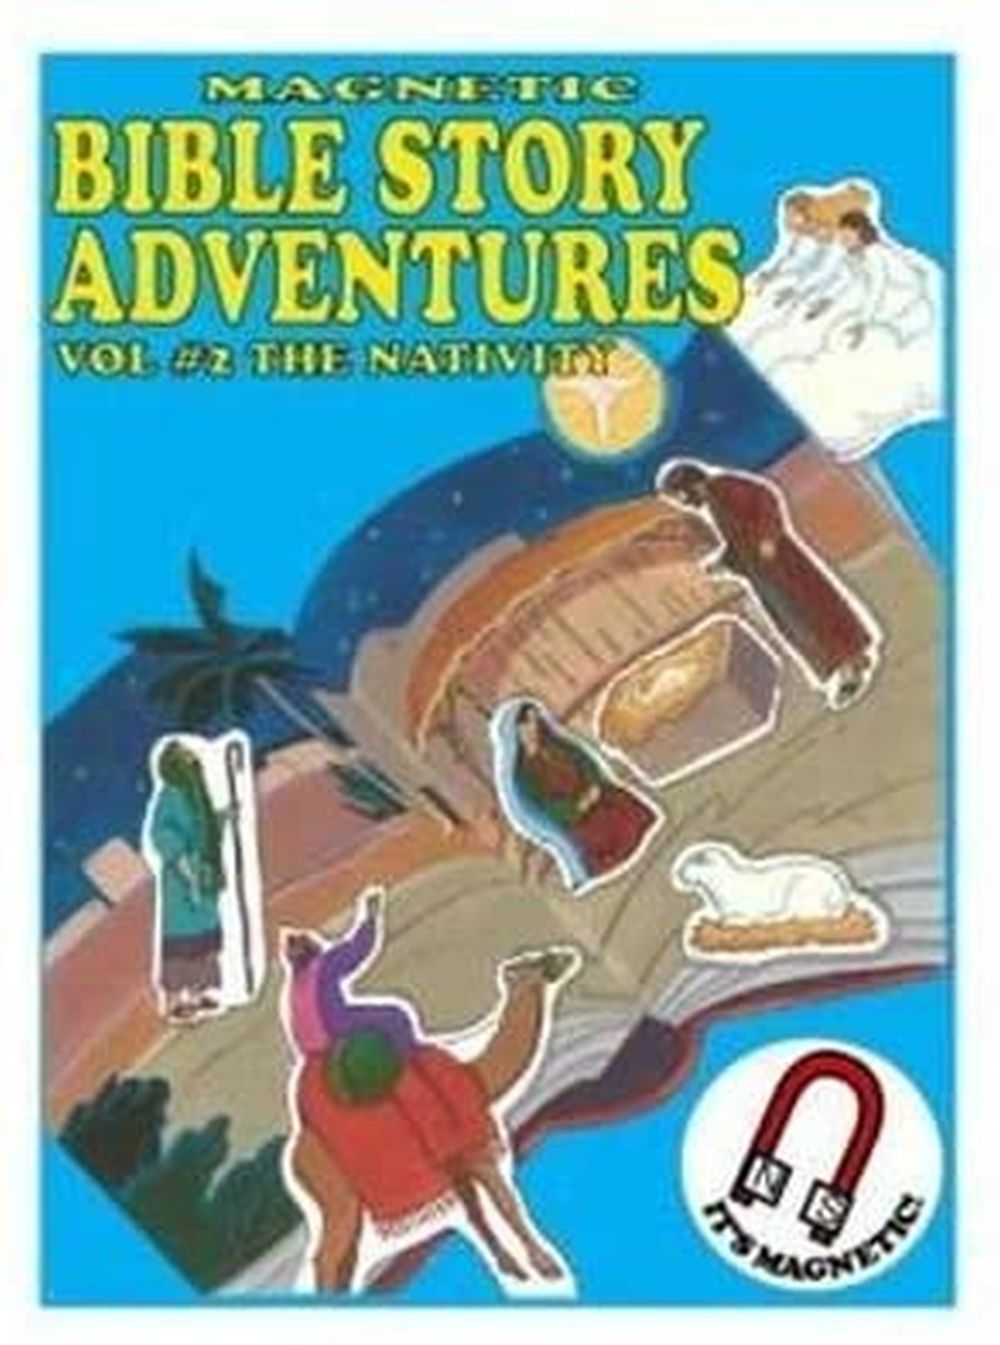 DENTT The Nativity Magnetic Bible Story Adventures Vol #2 - 